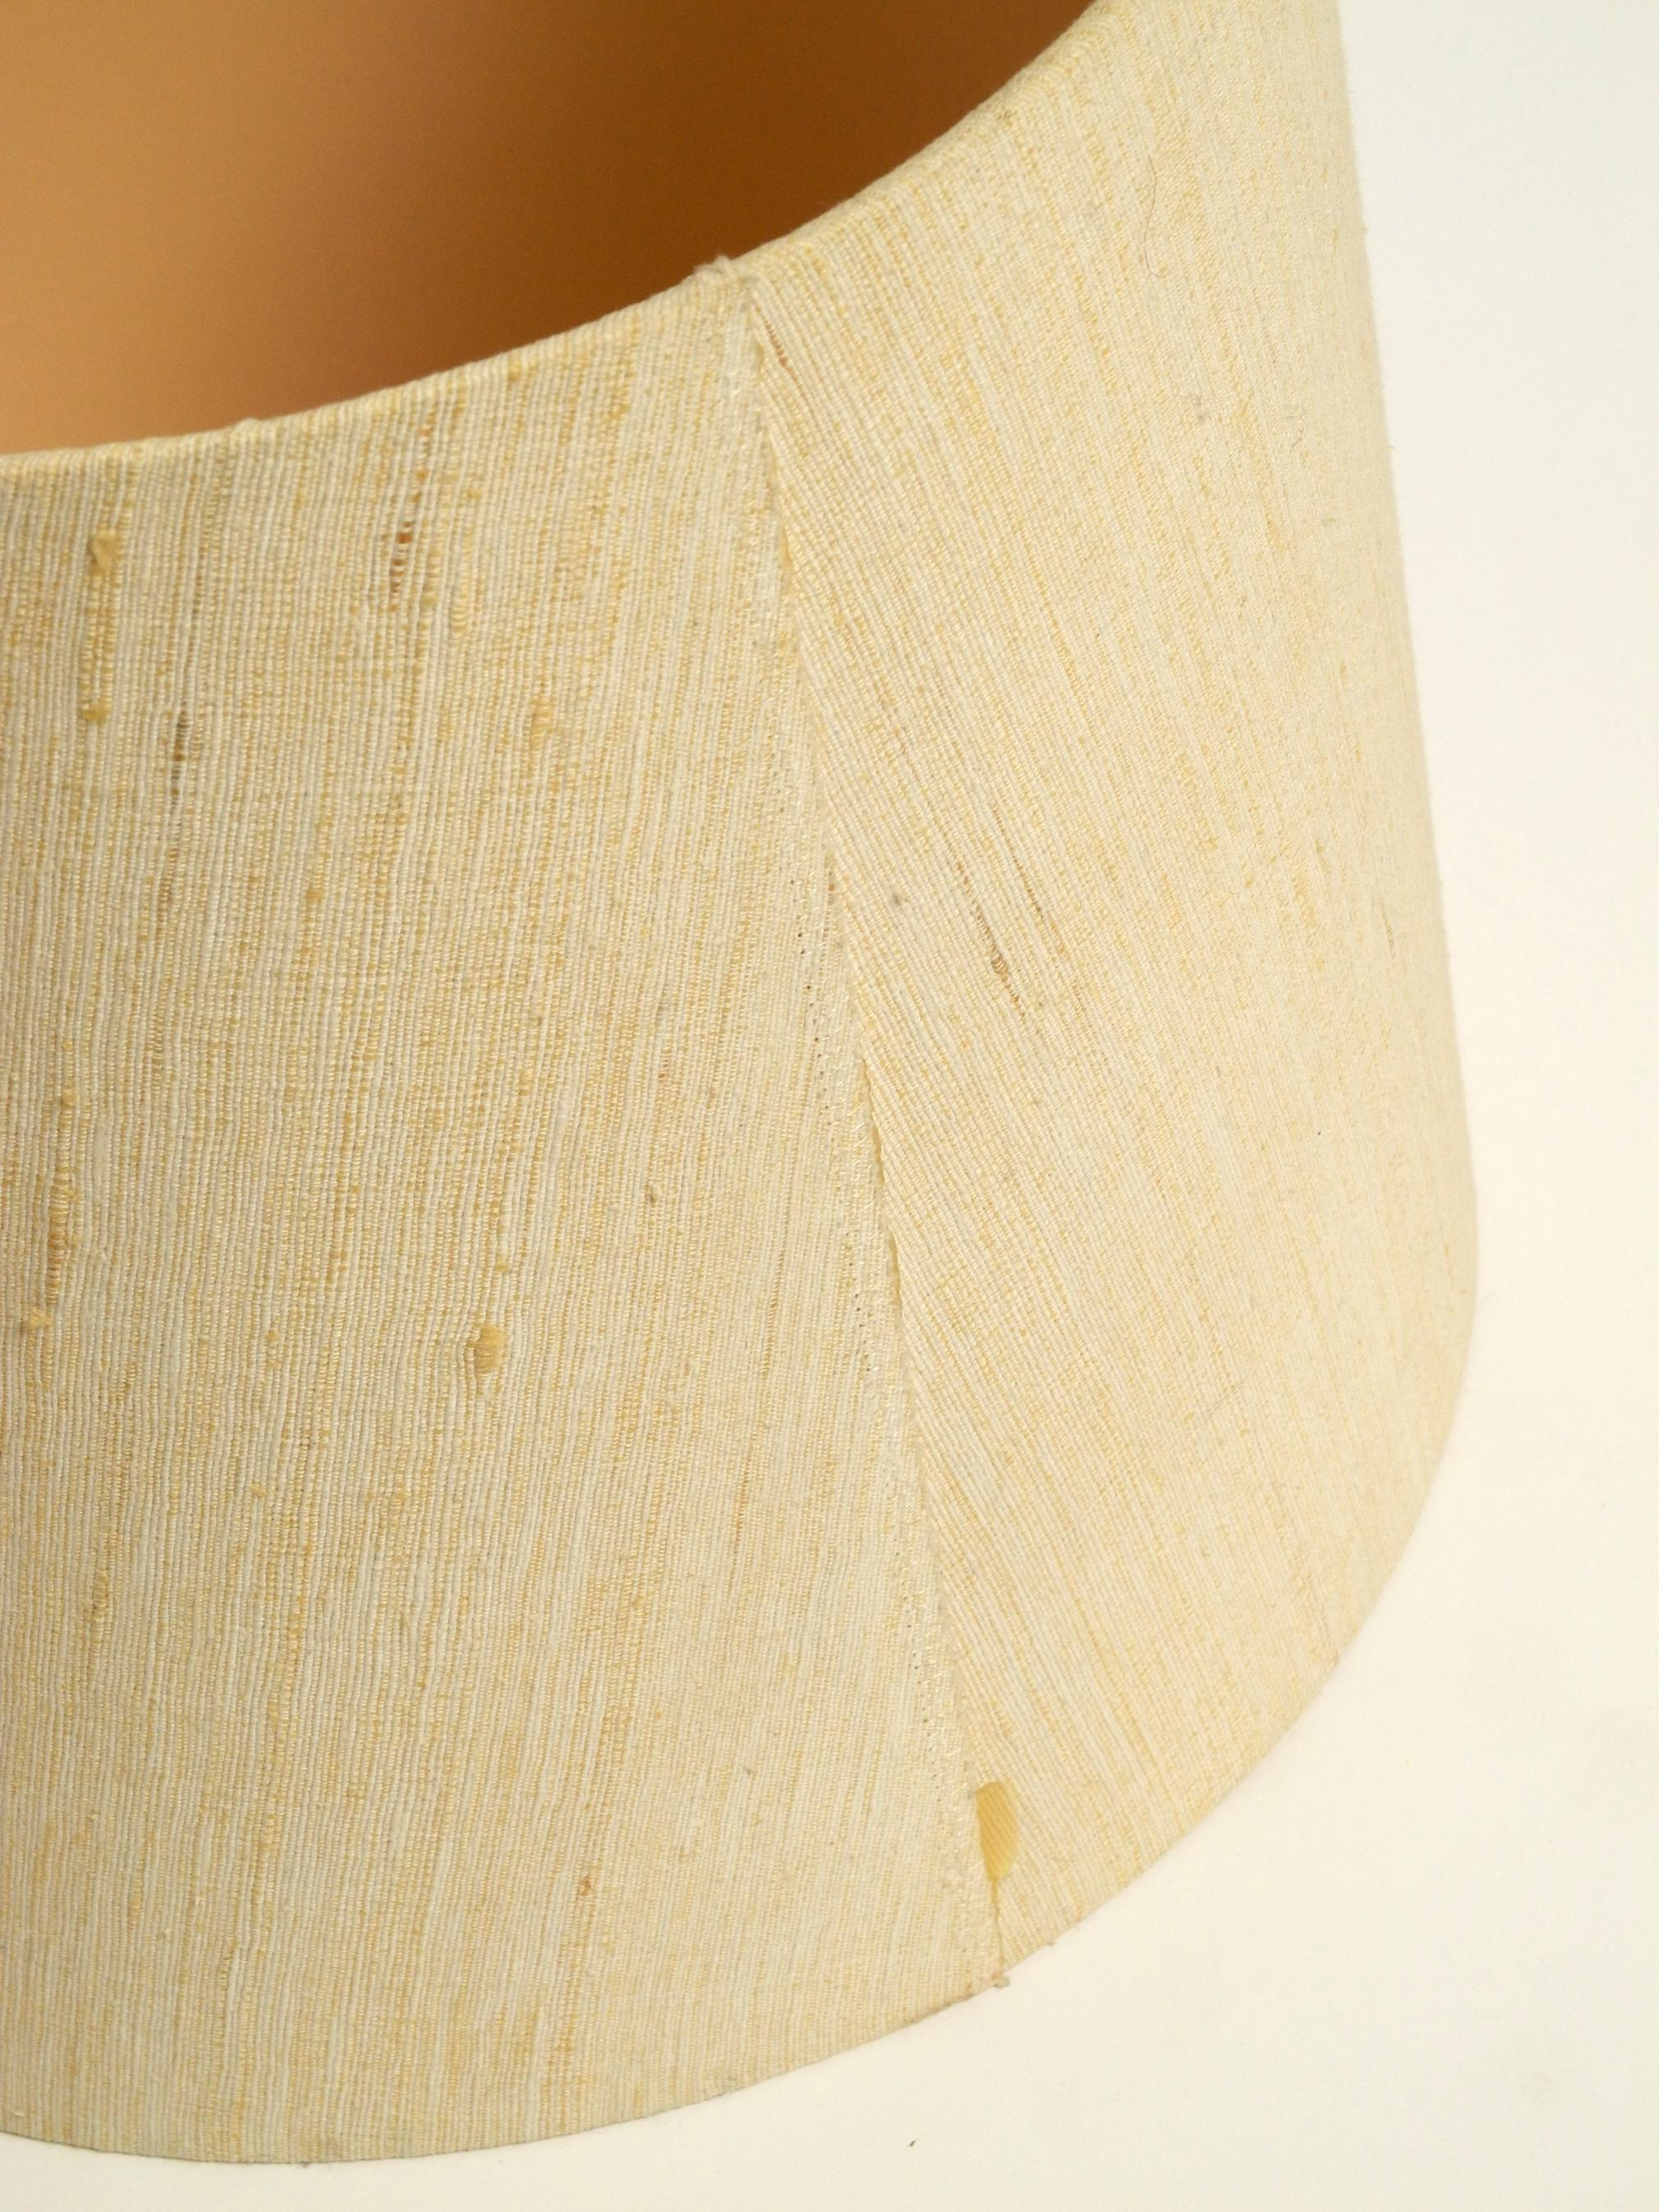 Late 20th Century Beautiful 80s Domus Teak Table Lamp with Original Wild Silk Fabric Shade For Sale